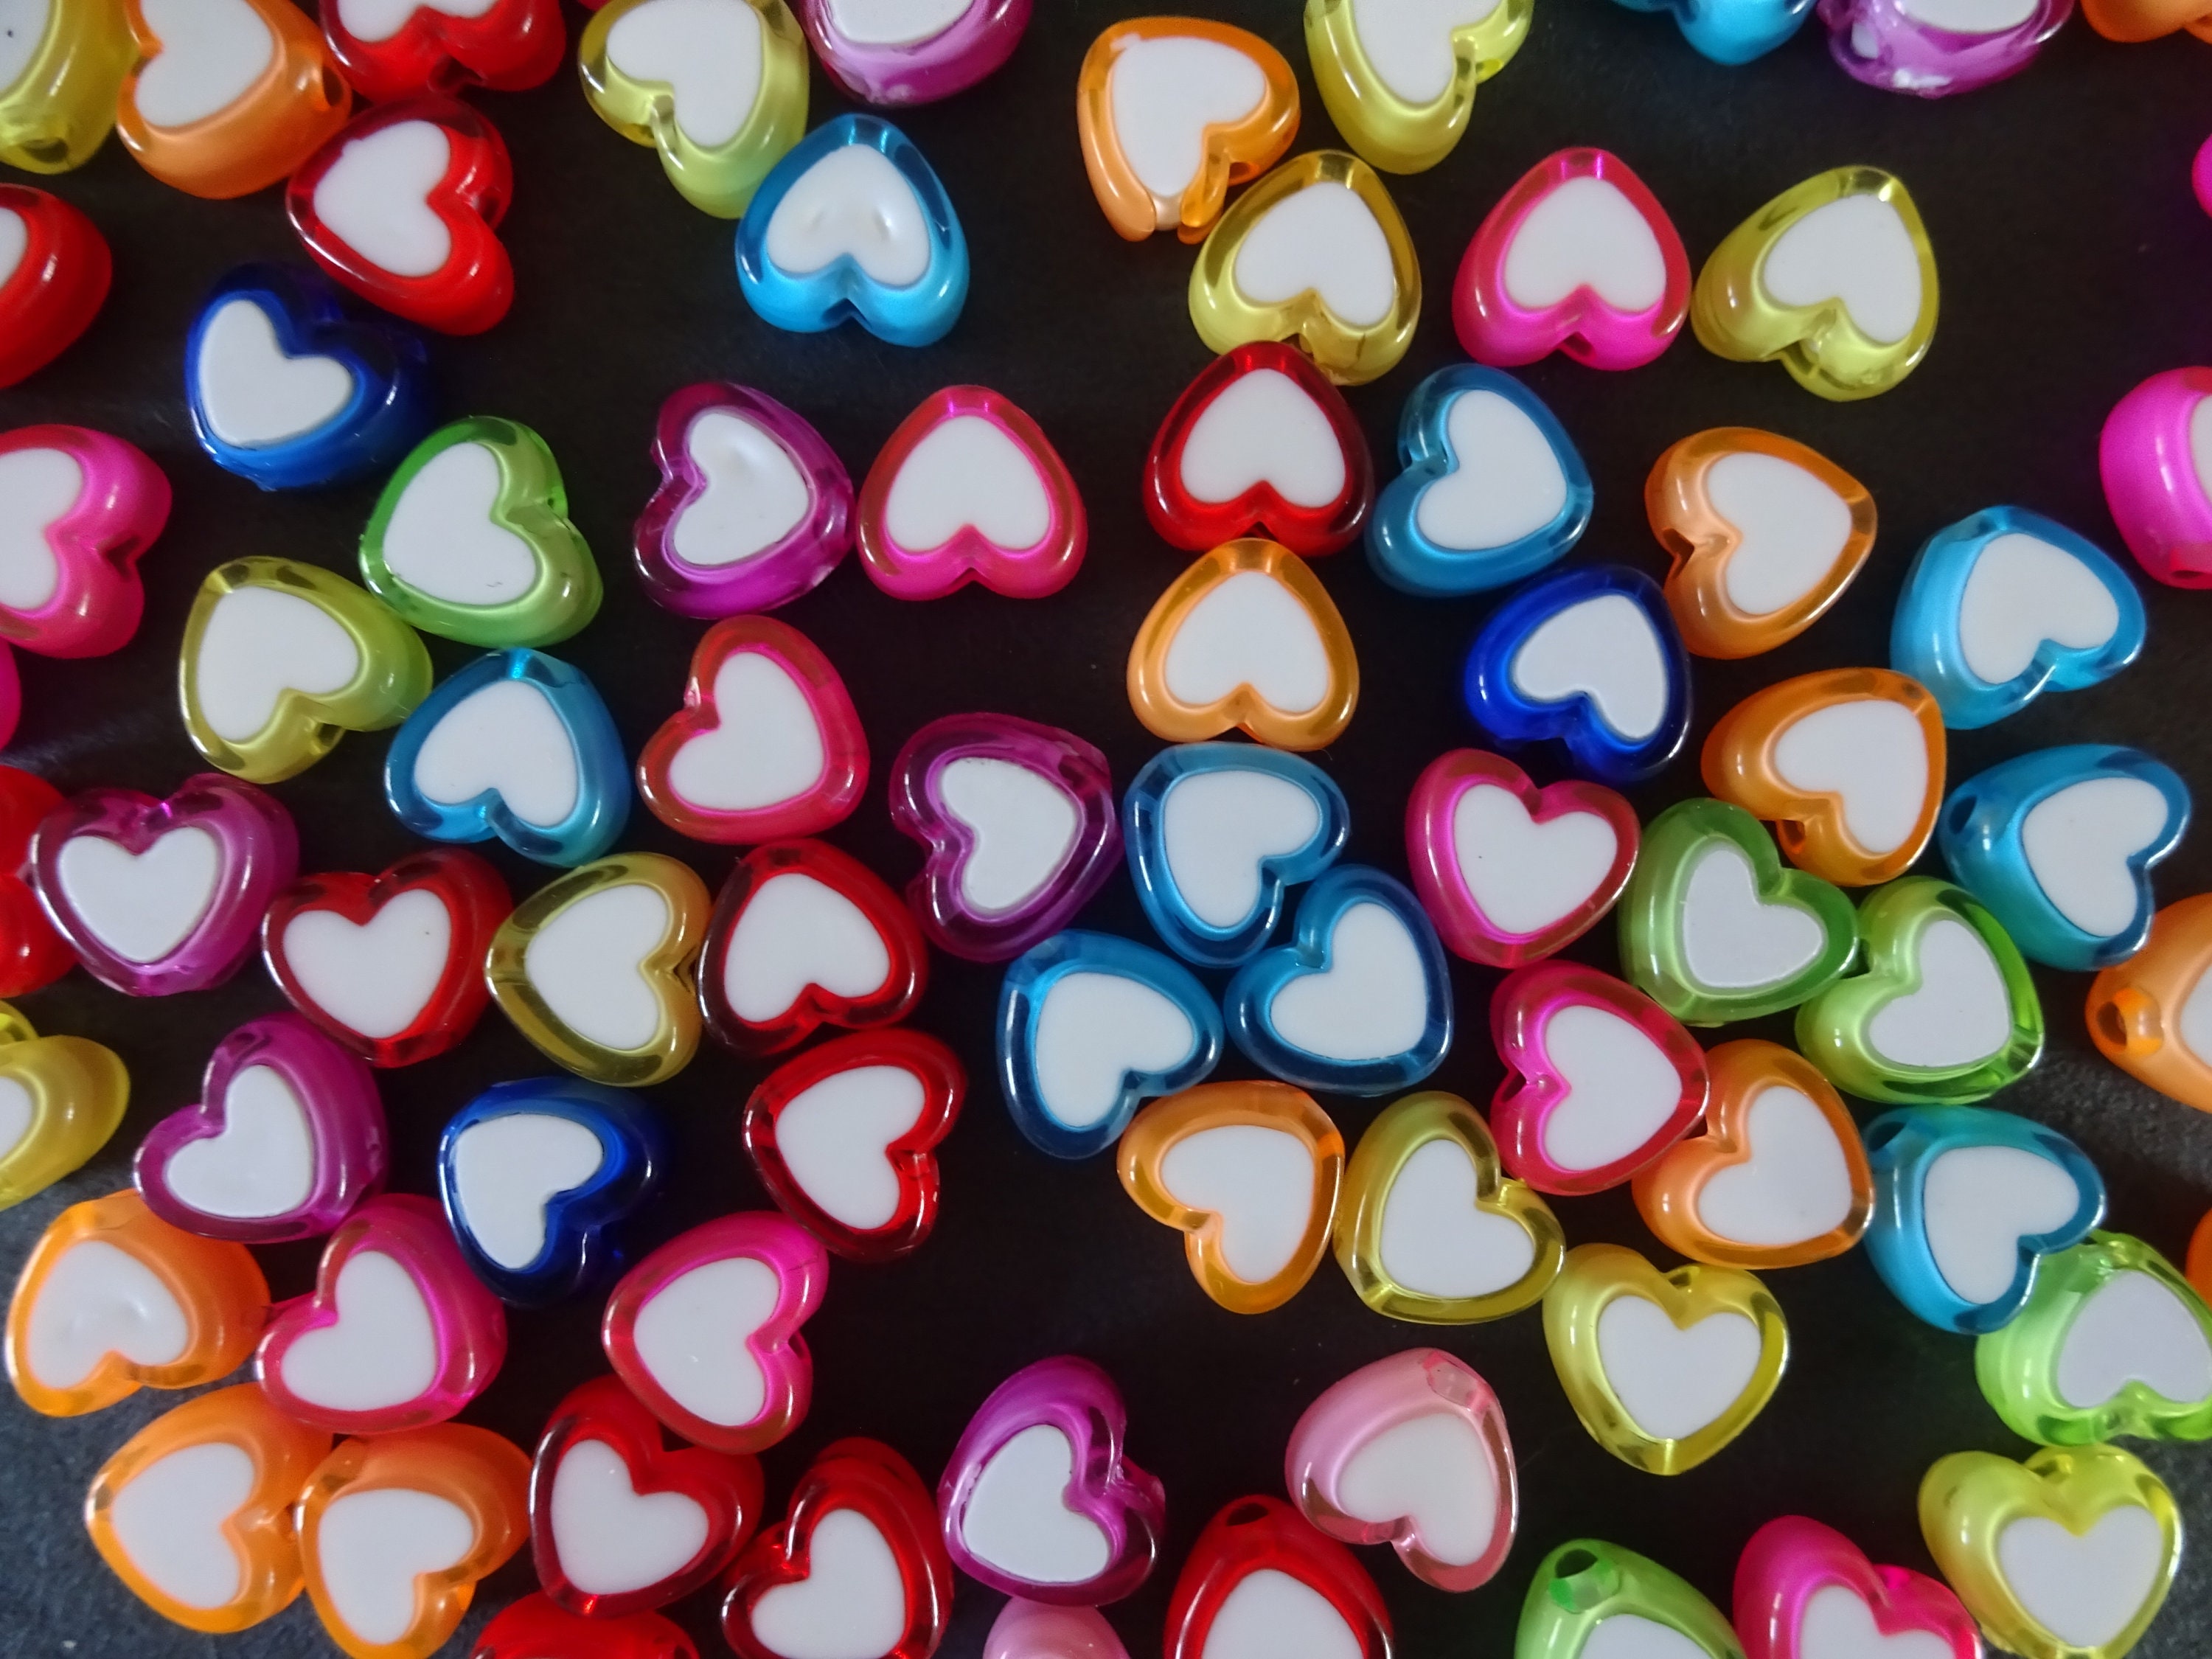 100 PACK OF 8x7mm Heart Acrylic Beads, Heart Bead, Mixed Color